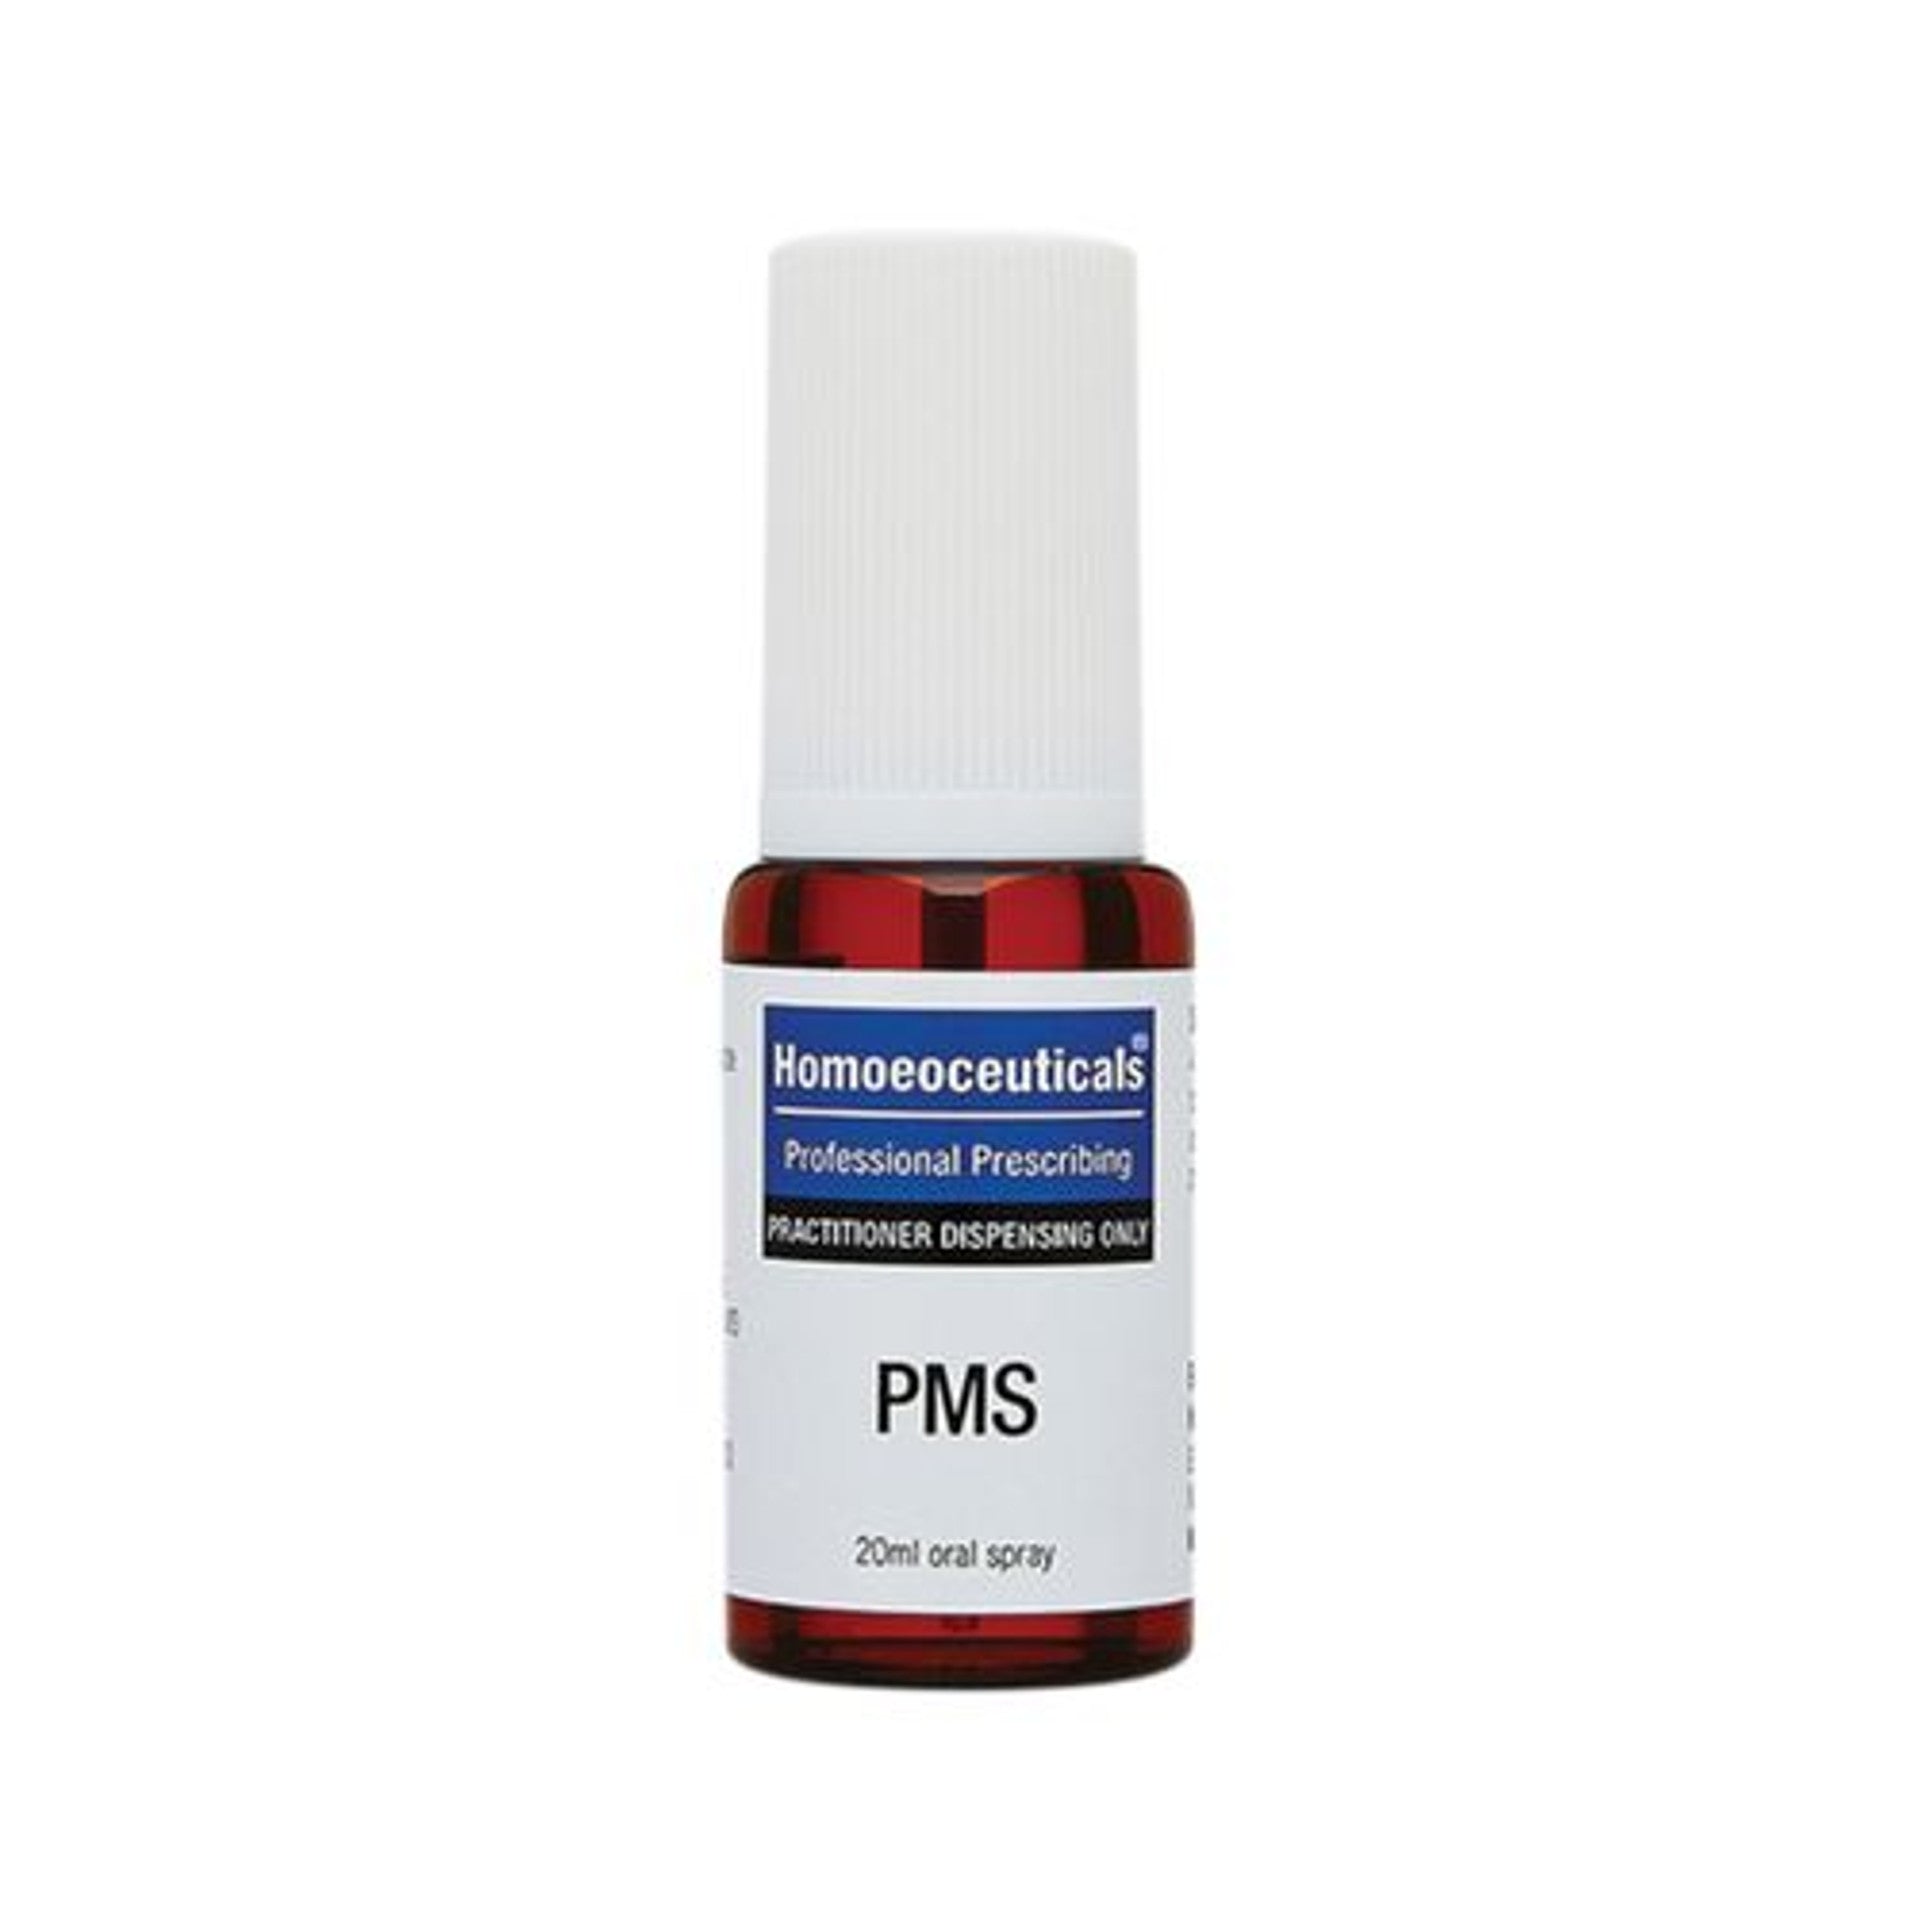 Homoeoceuticals PMS 20ml